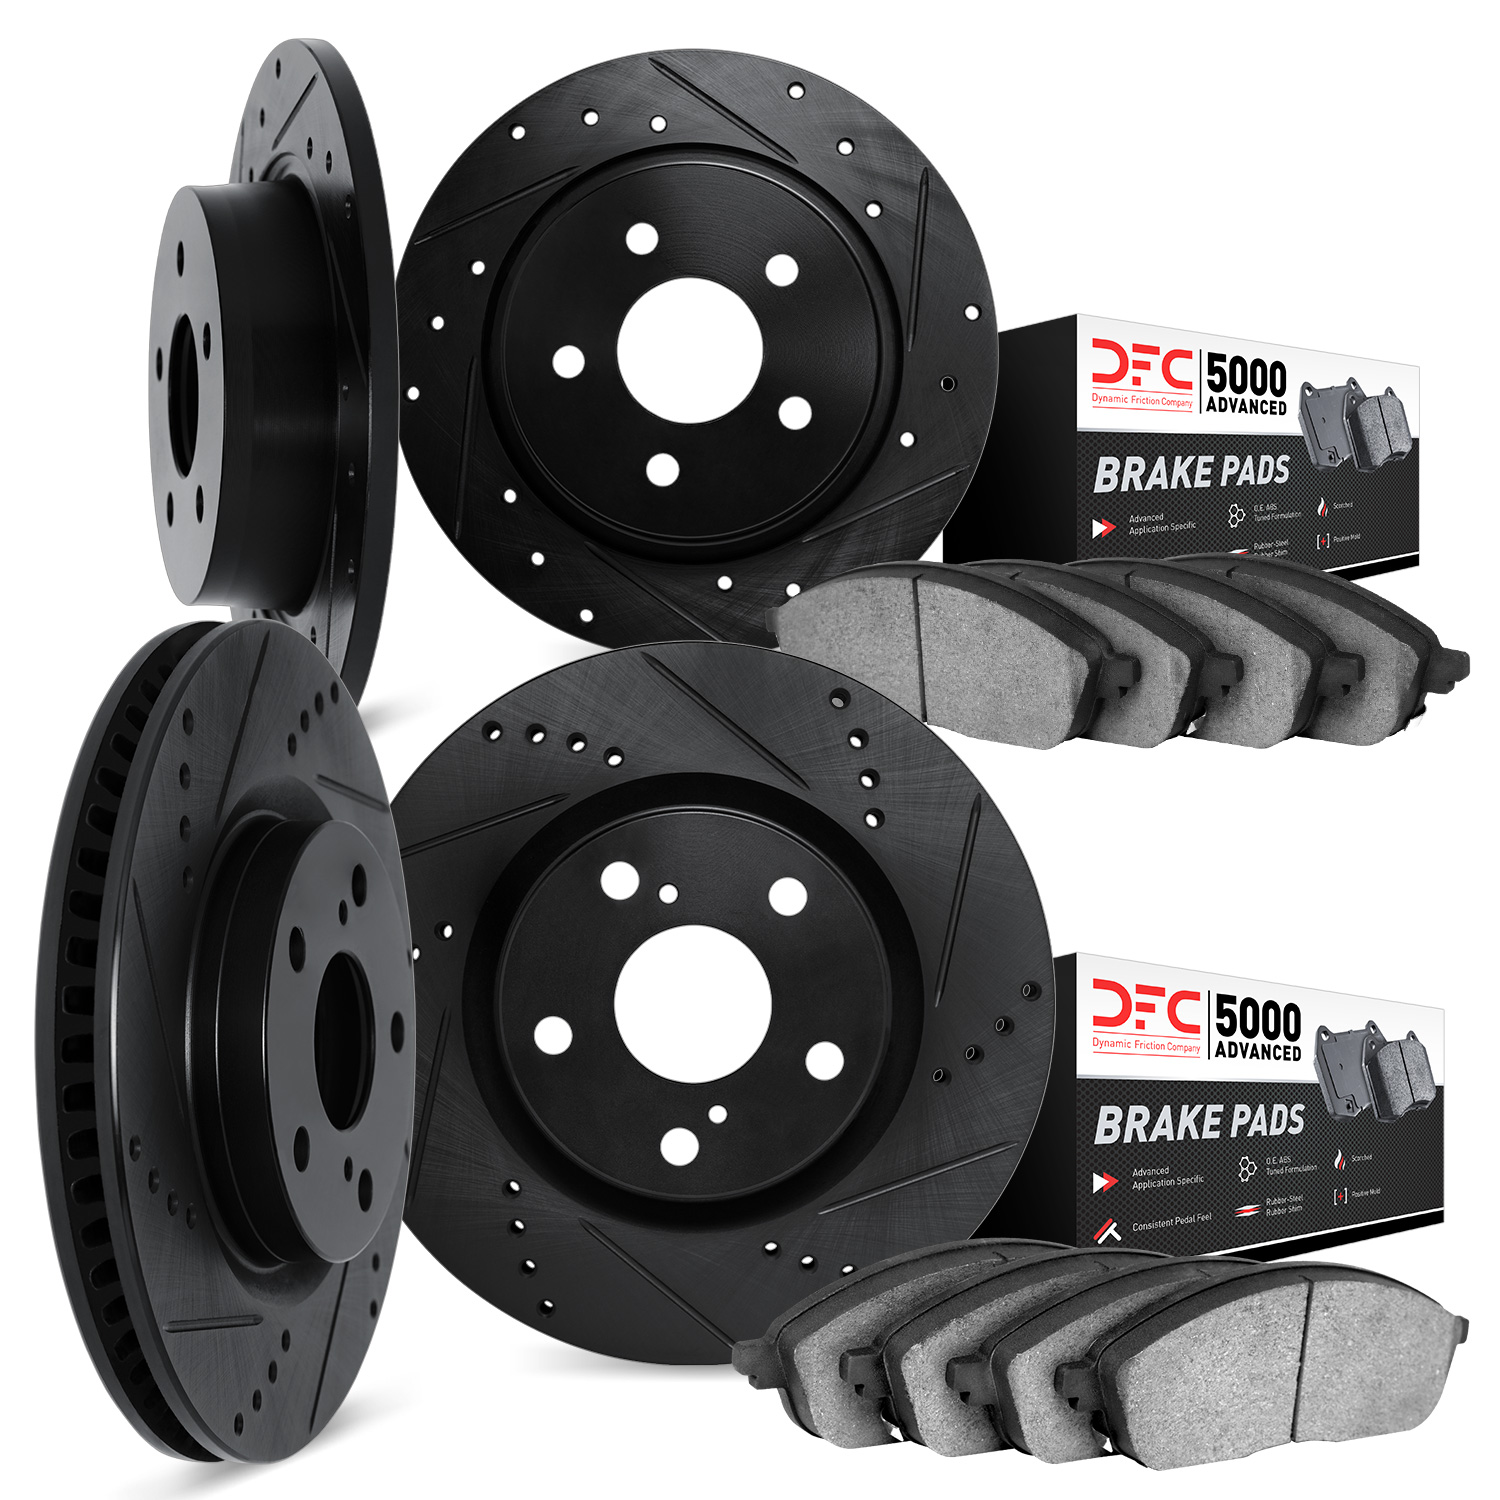 8504-74076 Drilled/Slotted Brake Rotors w/5000 Advanced Brake Pads Kit [Black], 1999-1999 Audi/Volkswagen, Position: Front and R